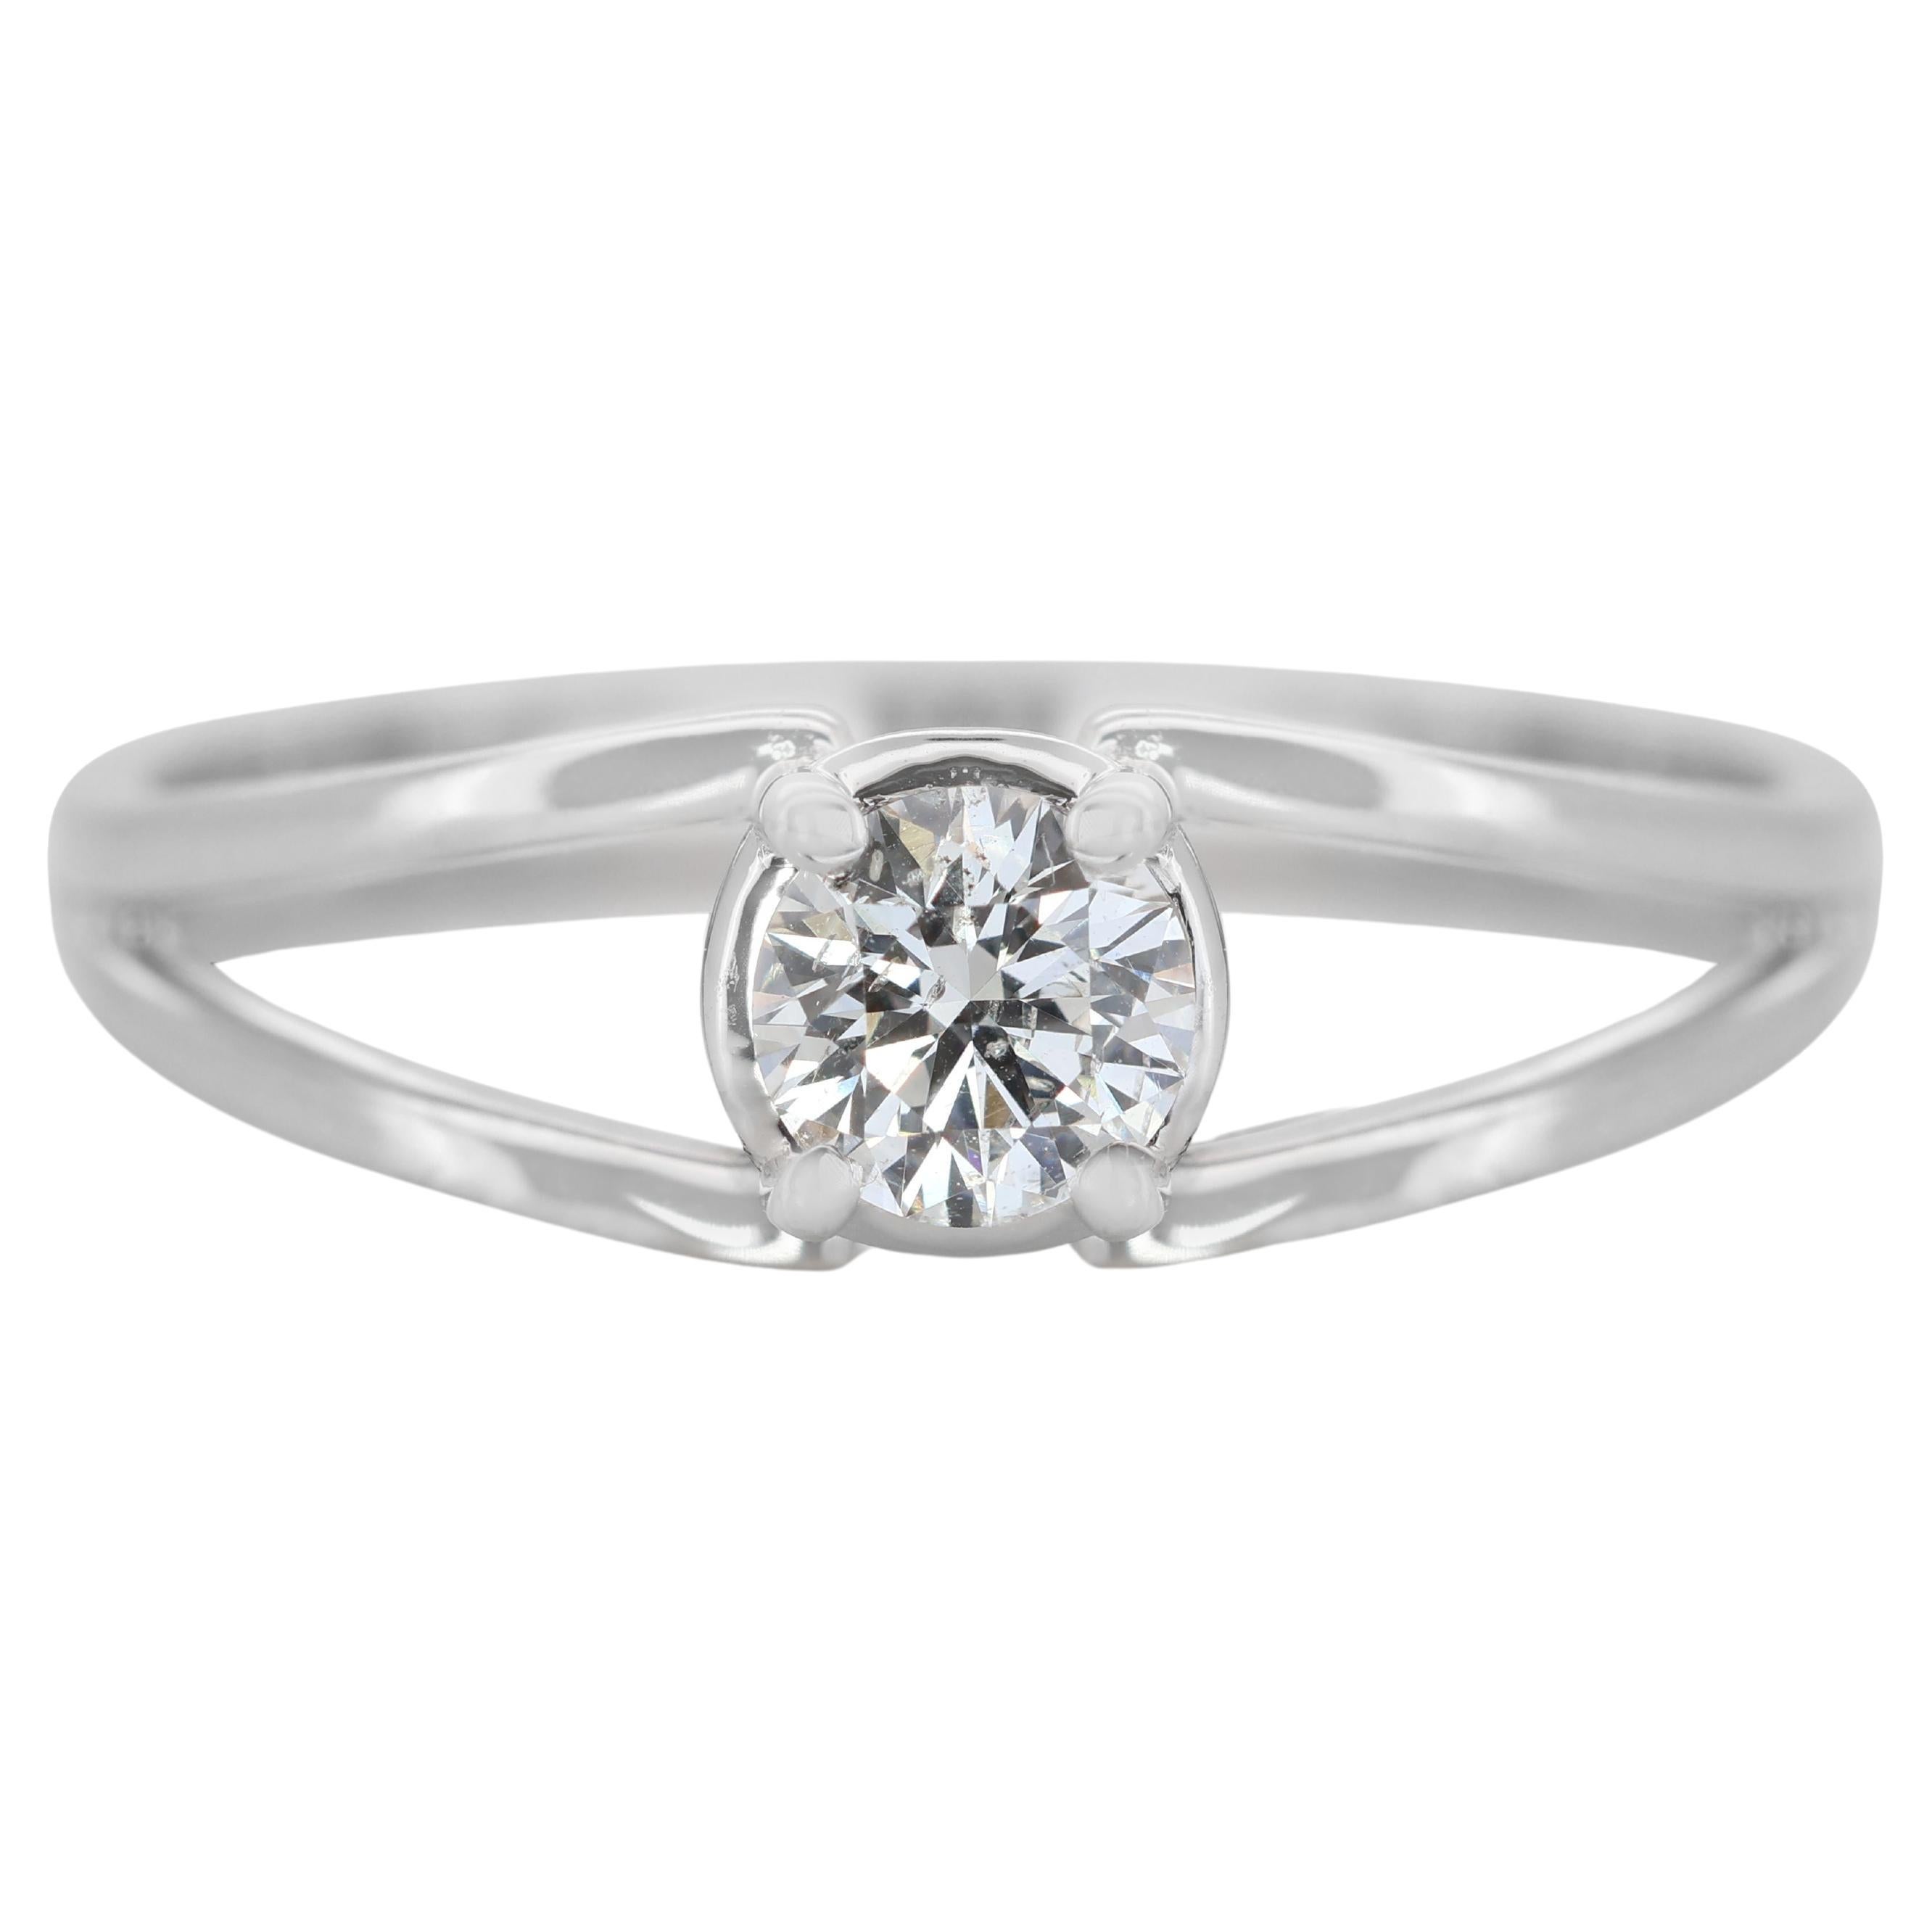 What is a Forevermark diamond?